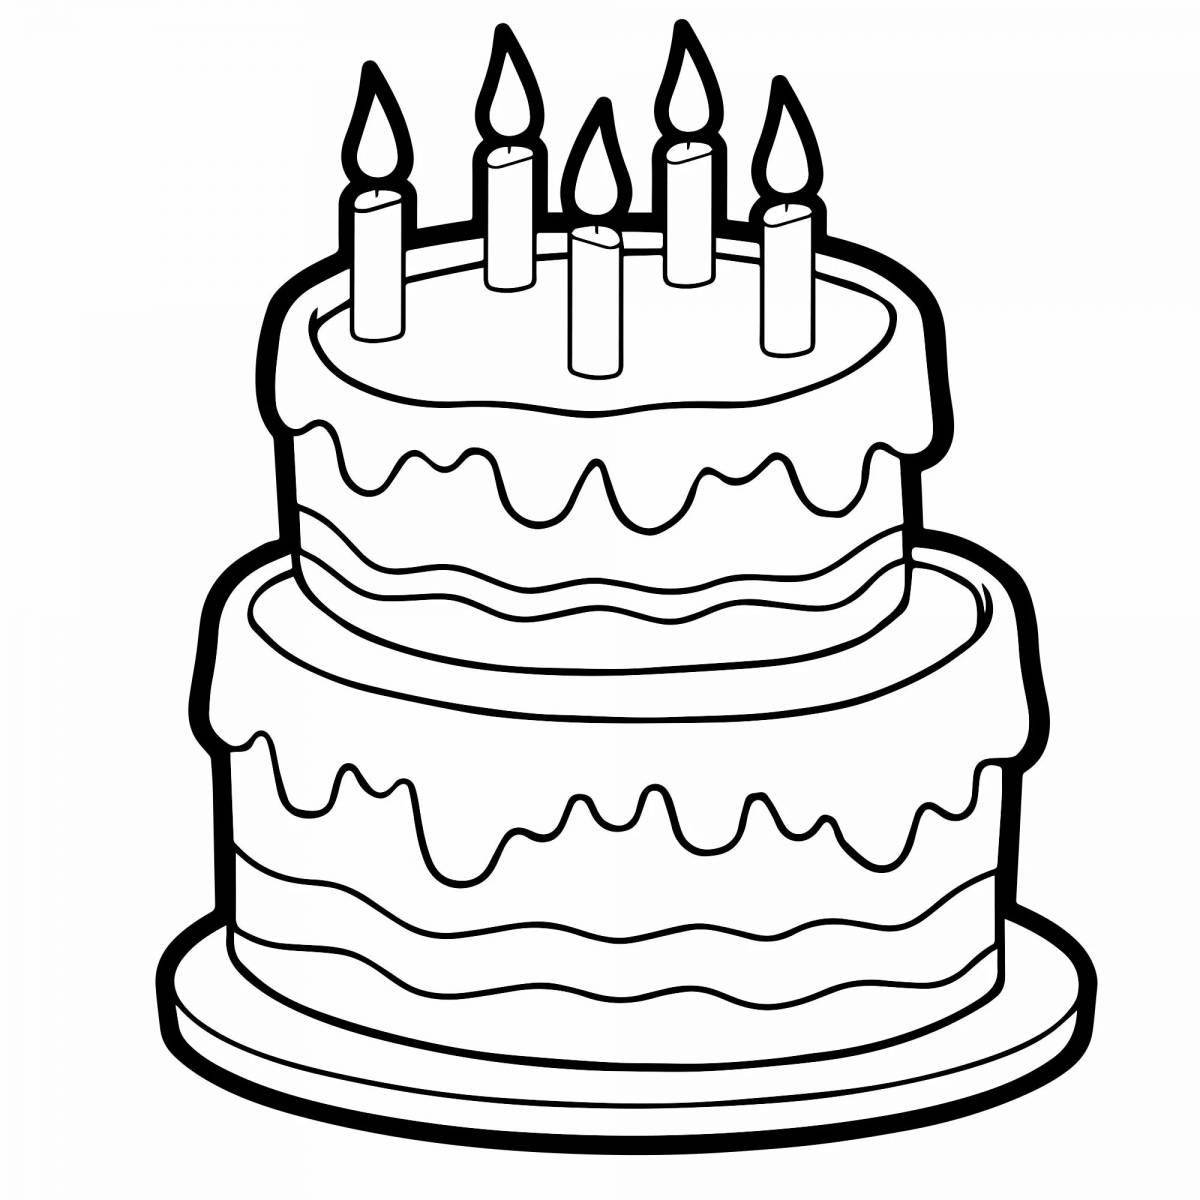 Crazy Cake Coloring Page for 3-4 year olds